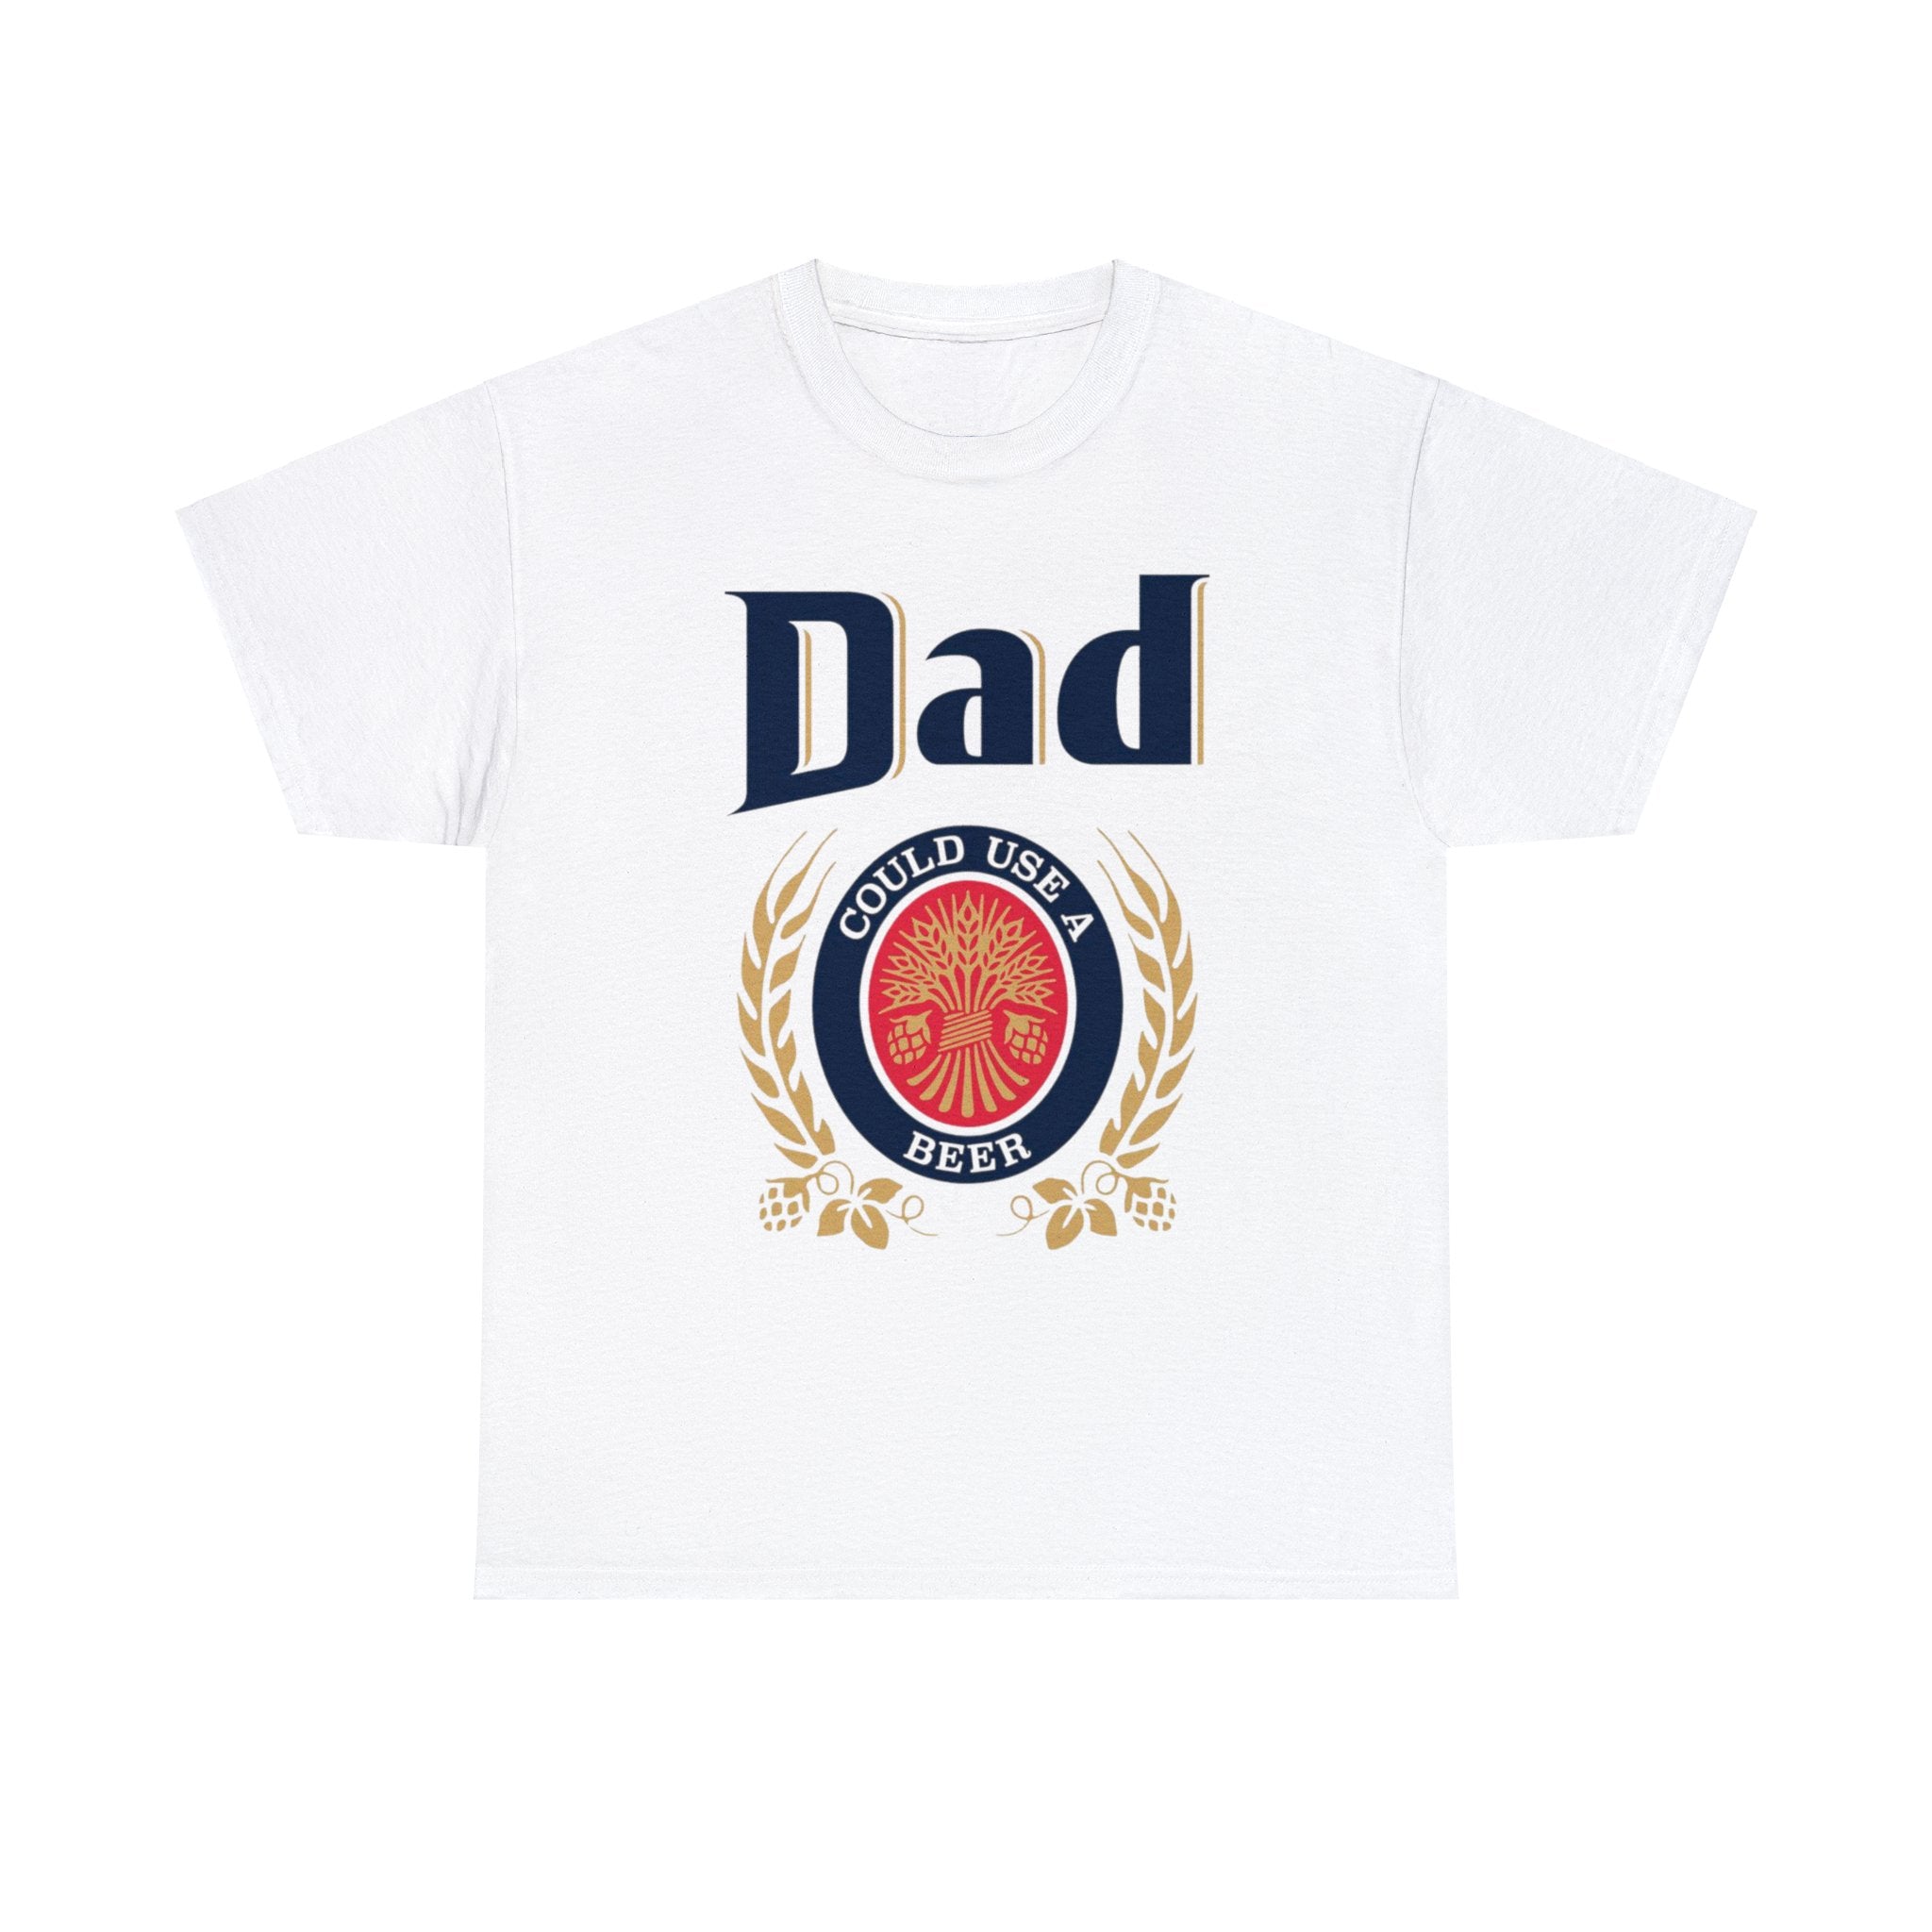 Dad Could Use a Beer - Unisex Heavy Cotton Tee